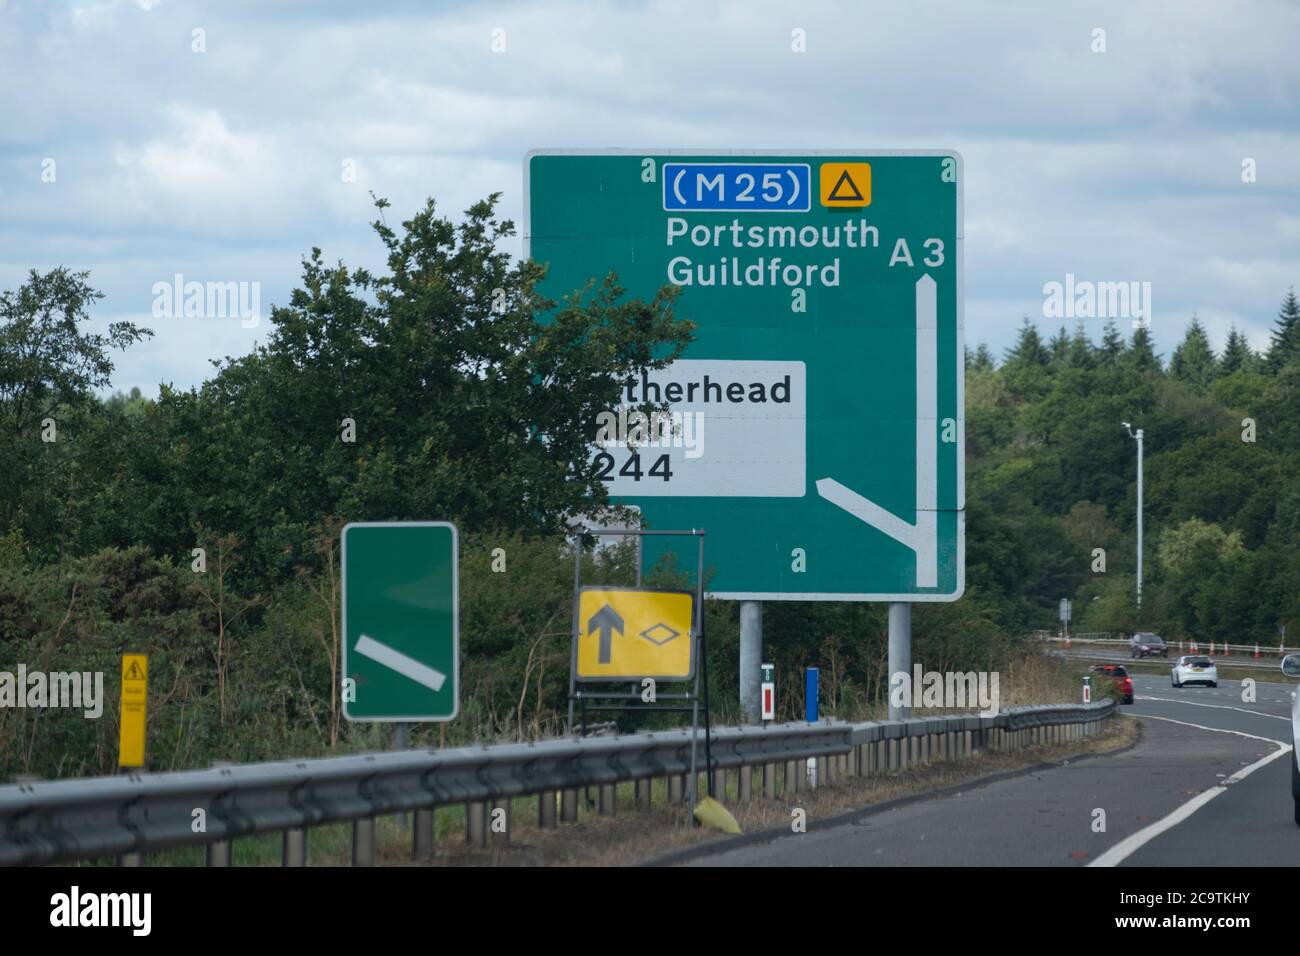 Partially obsured route signs on the A3 dual carriageway in Surrey, England, August 2020 Stock Photo